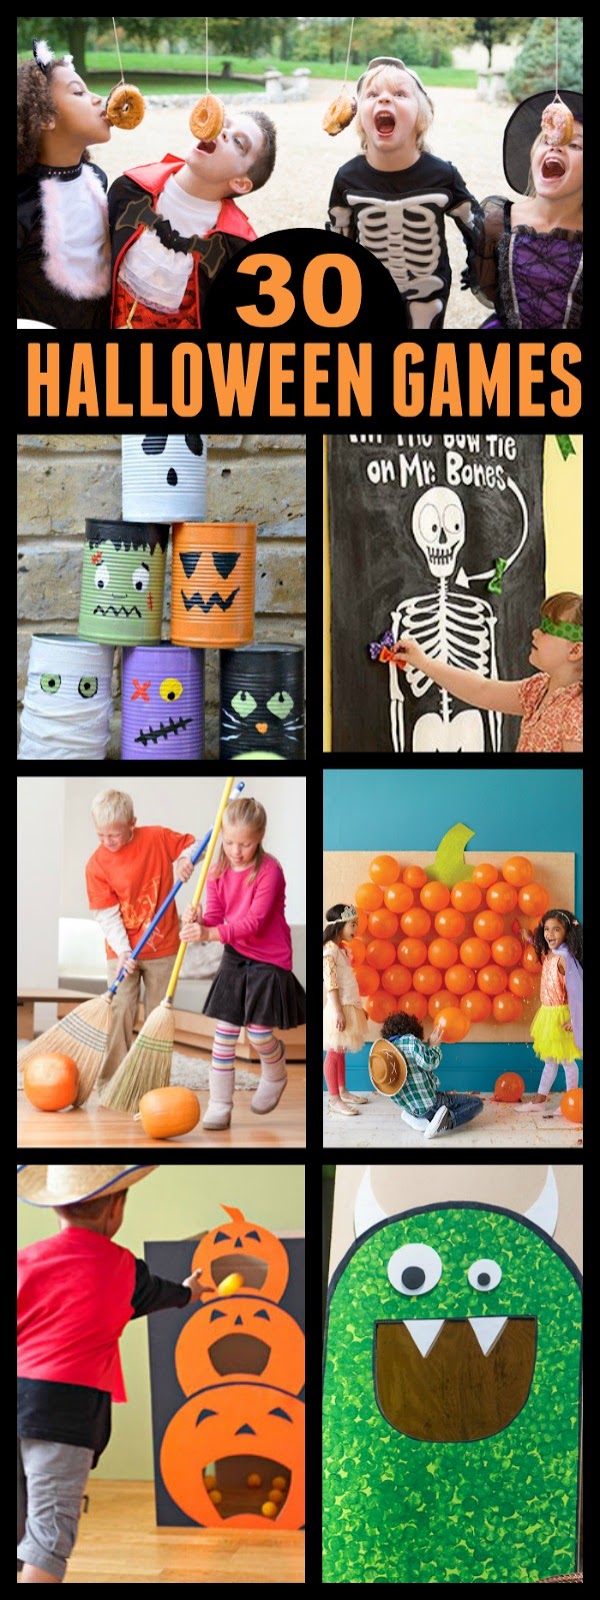 Monster games for kids halloween party